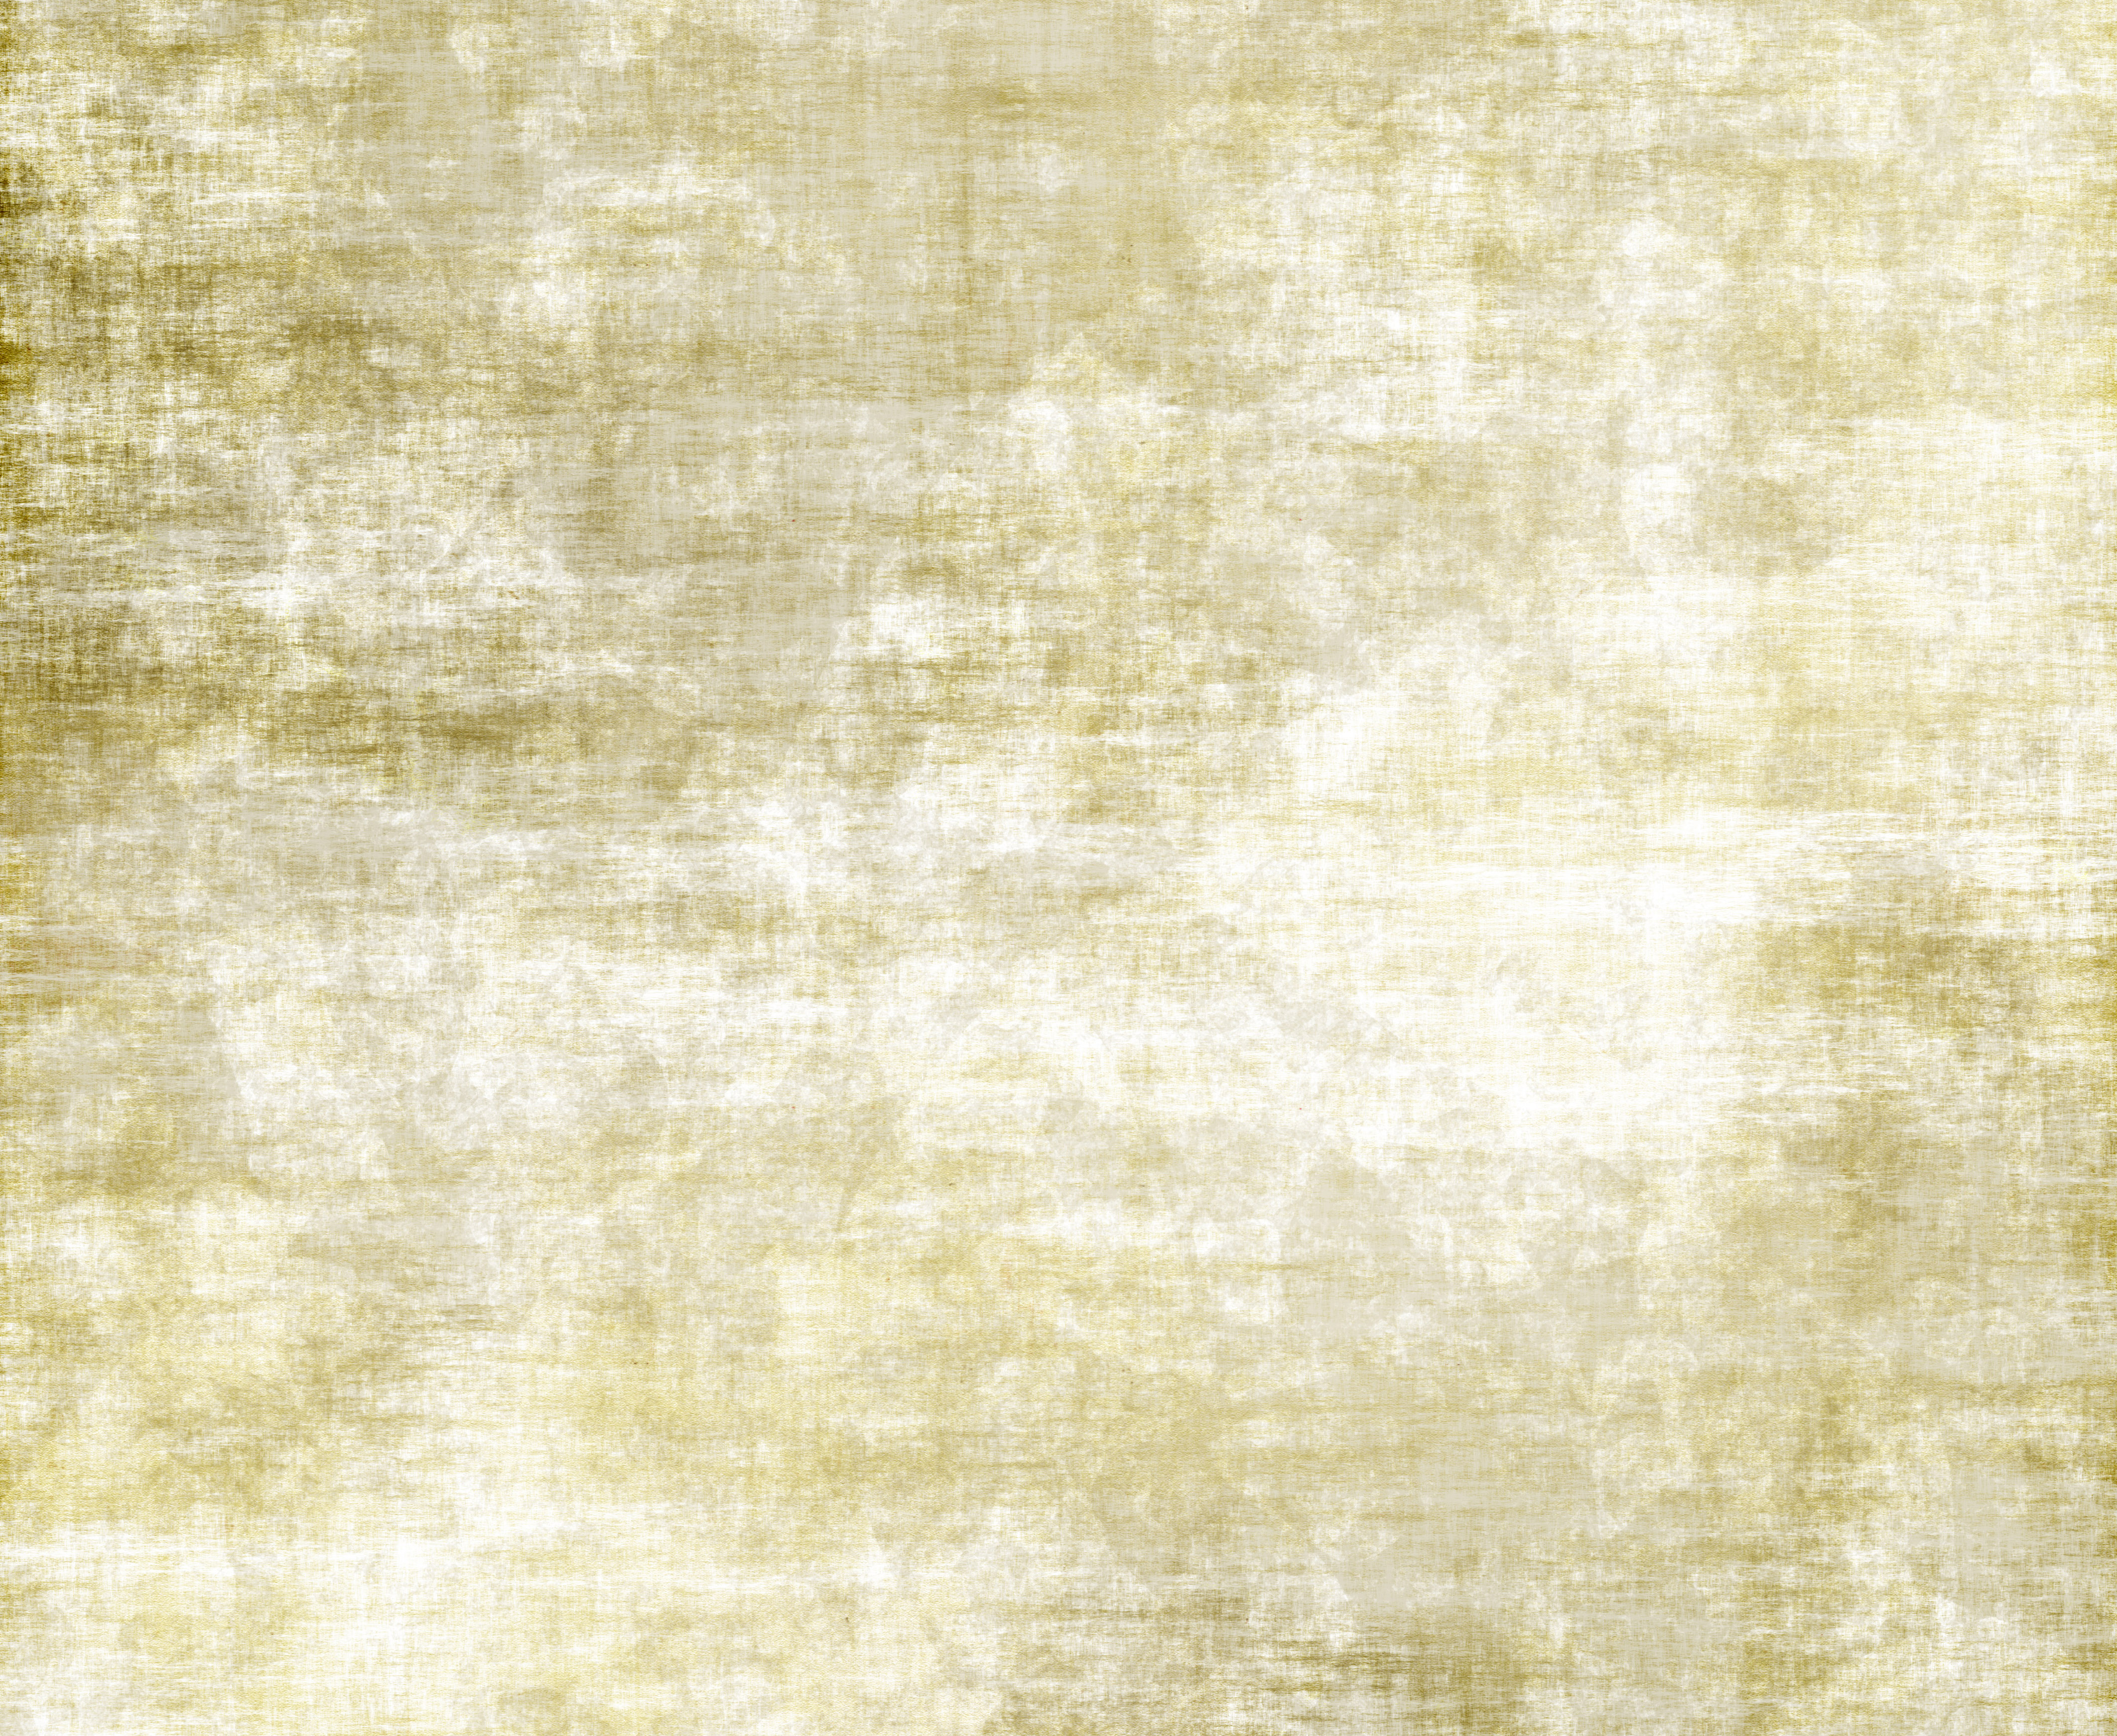 Background Texture  Www Mytextures   1500 Free Textures   Picture